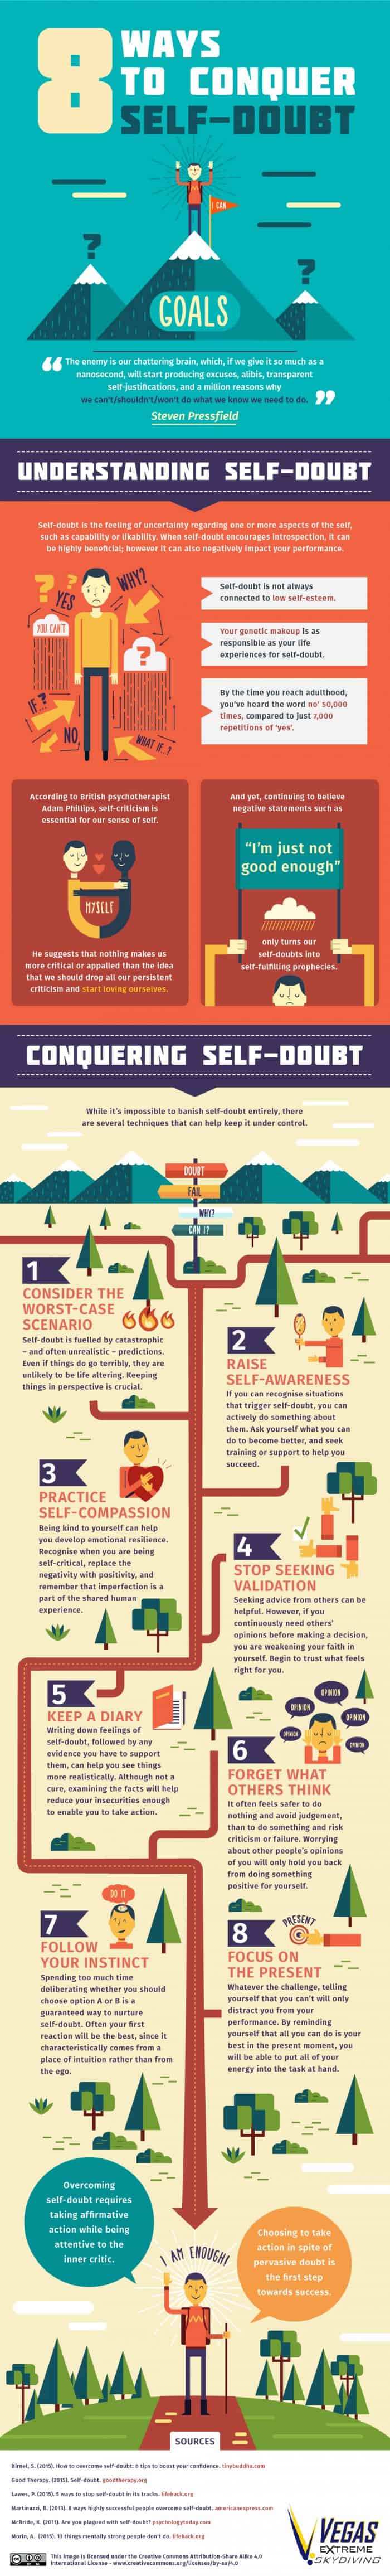 infographic of 8 ways to conquer self doubt